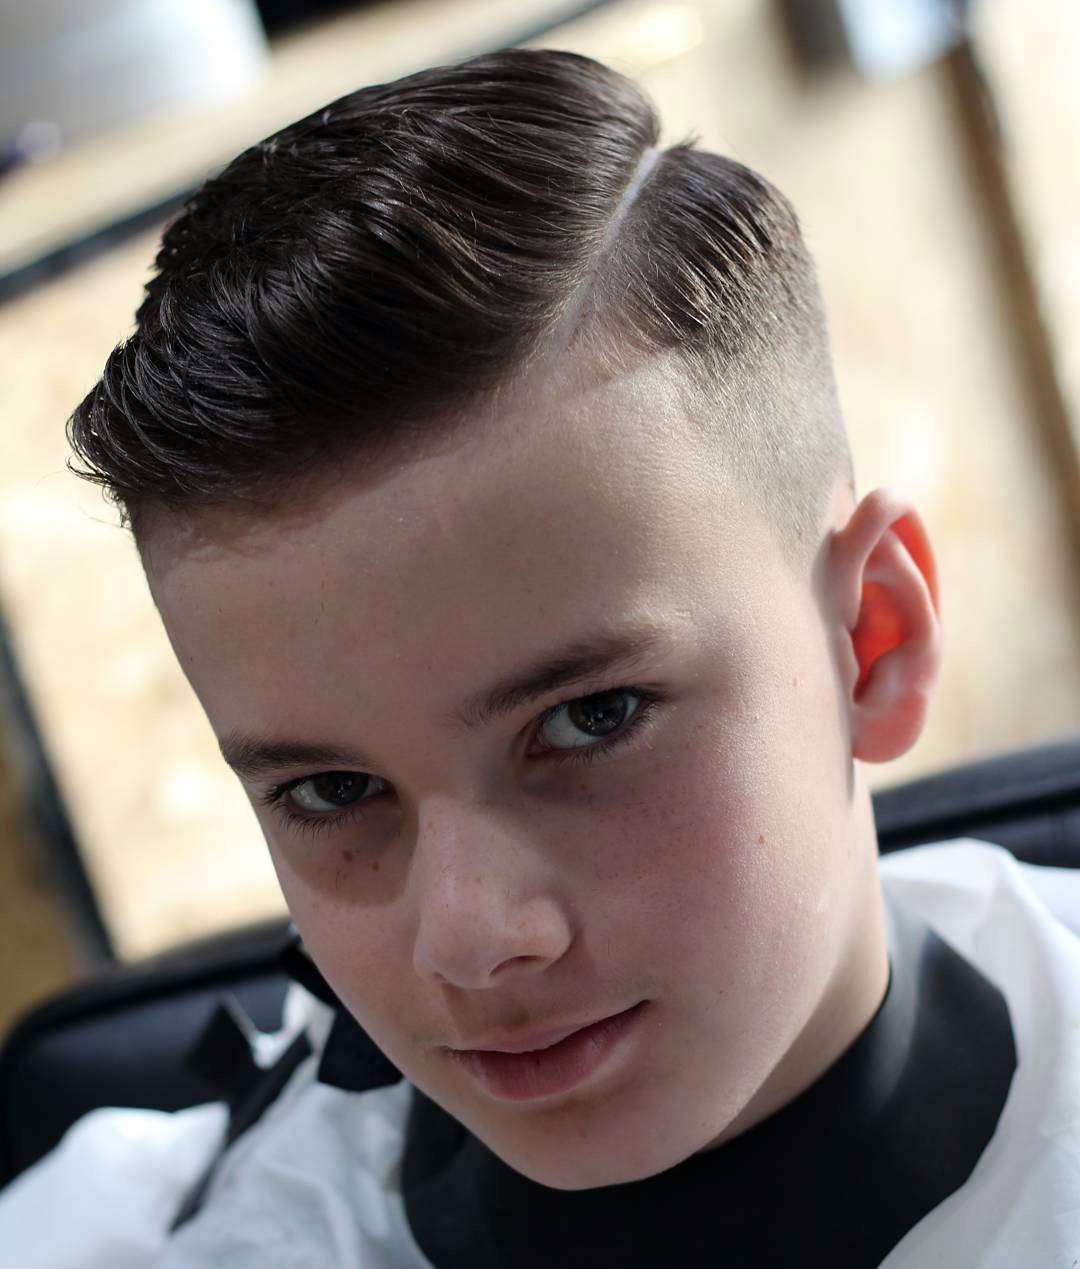 100 Excellent School Haircuts For Boys Styling Tips